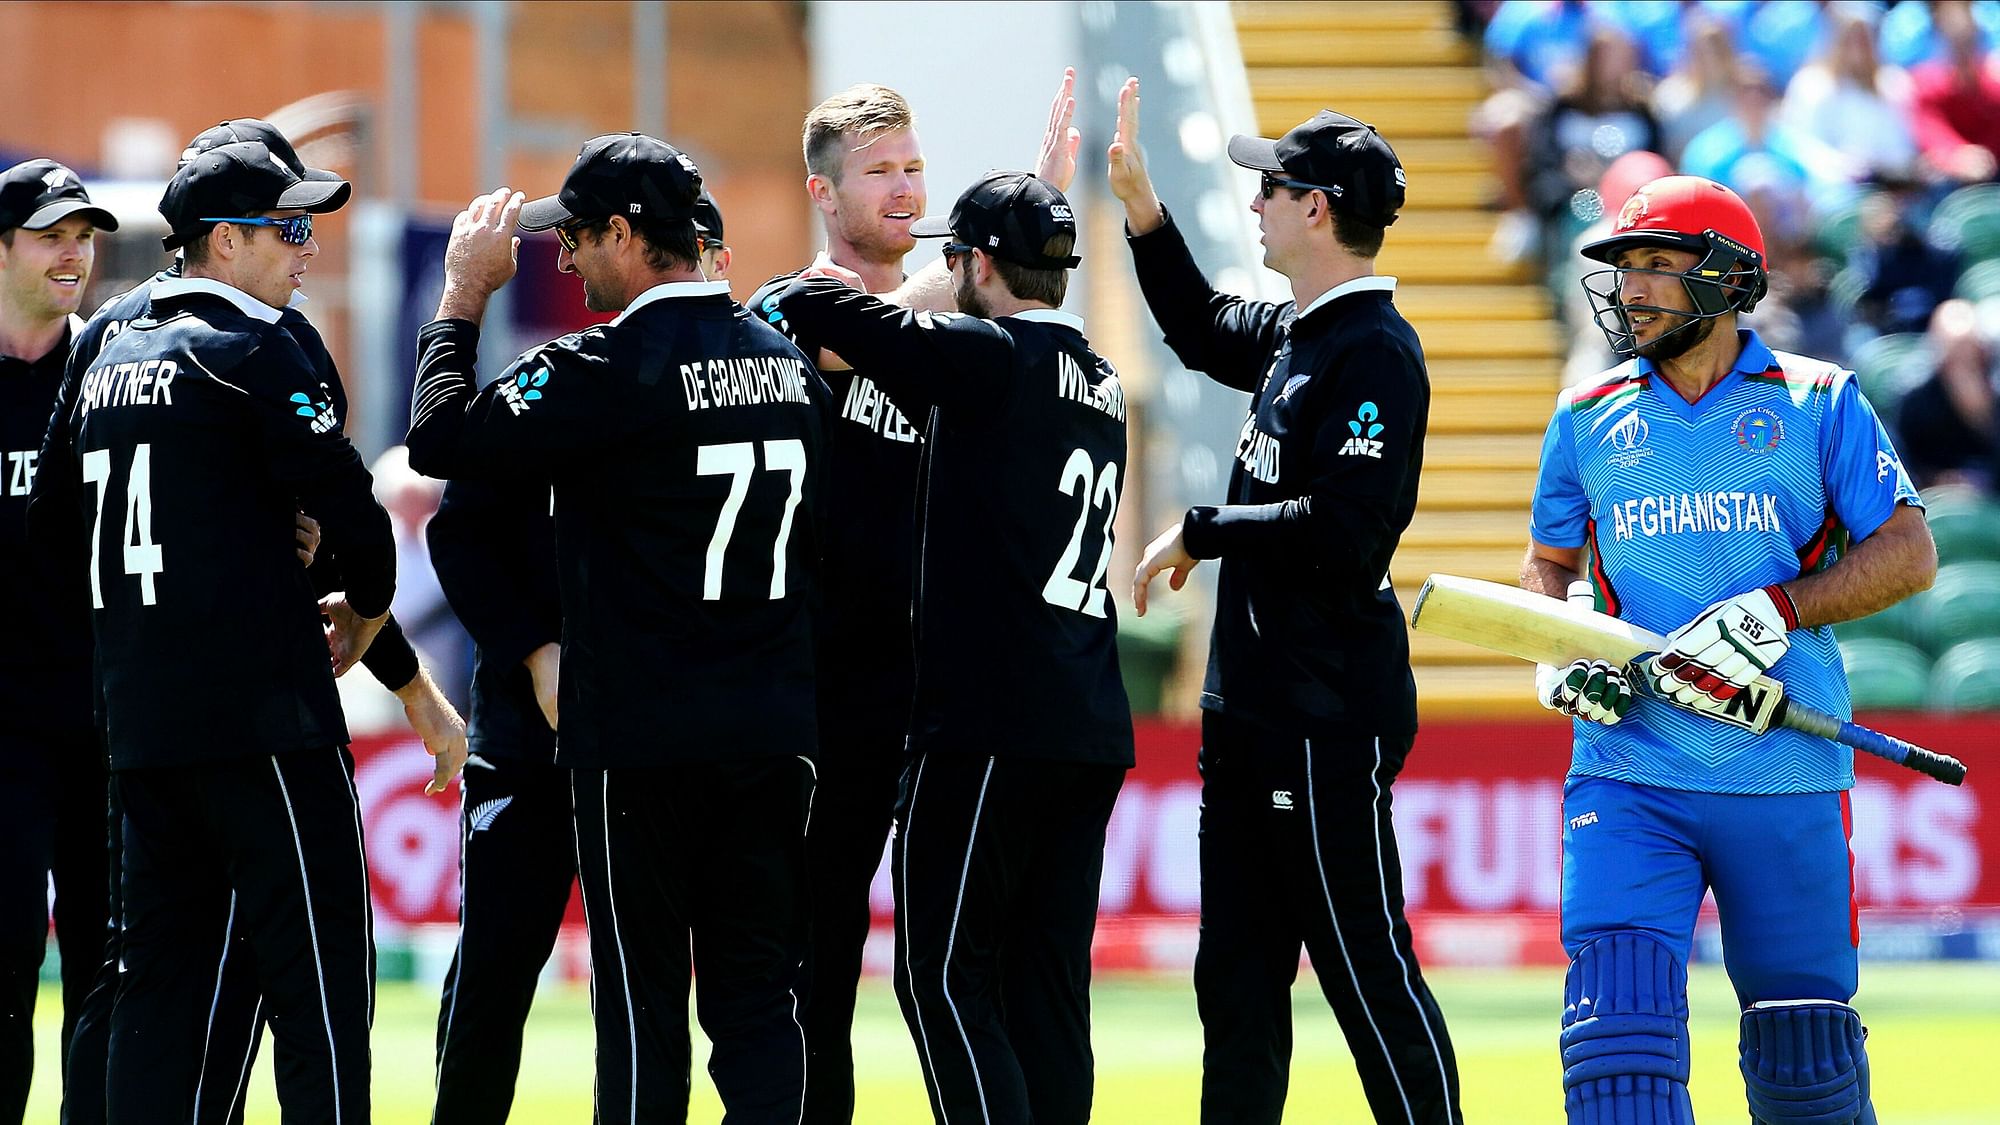 New Zealand vs Afghanistan, Cricket World Cup 2019 Match Highlights